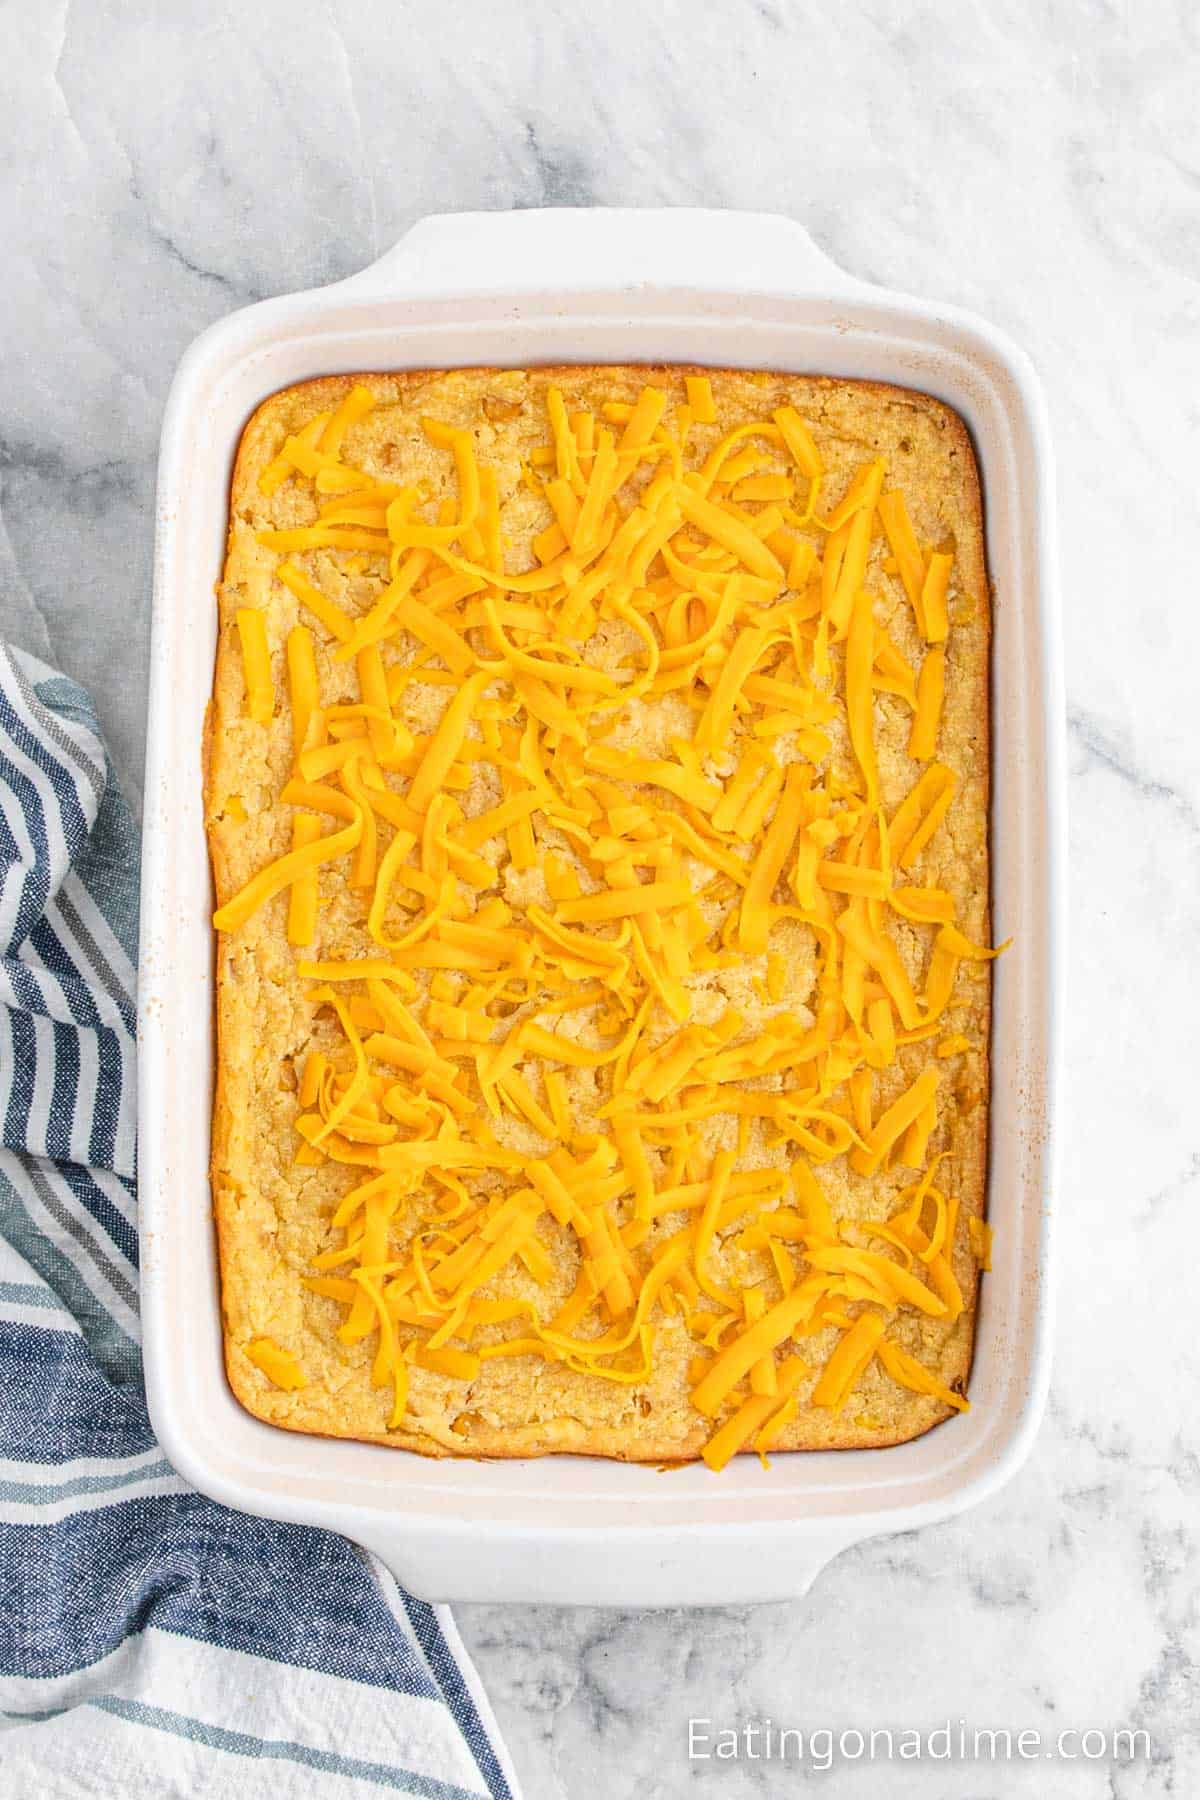 Baked corn casserole topped with shredded cheese in a baking dish